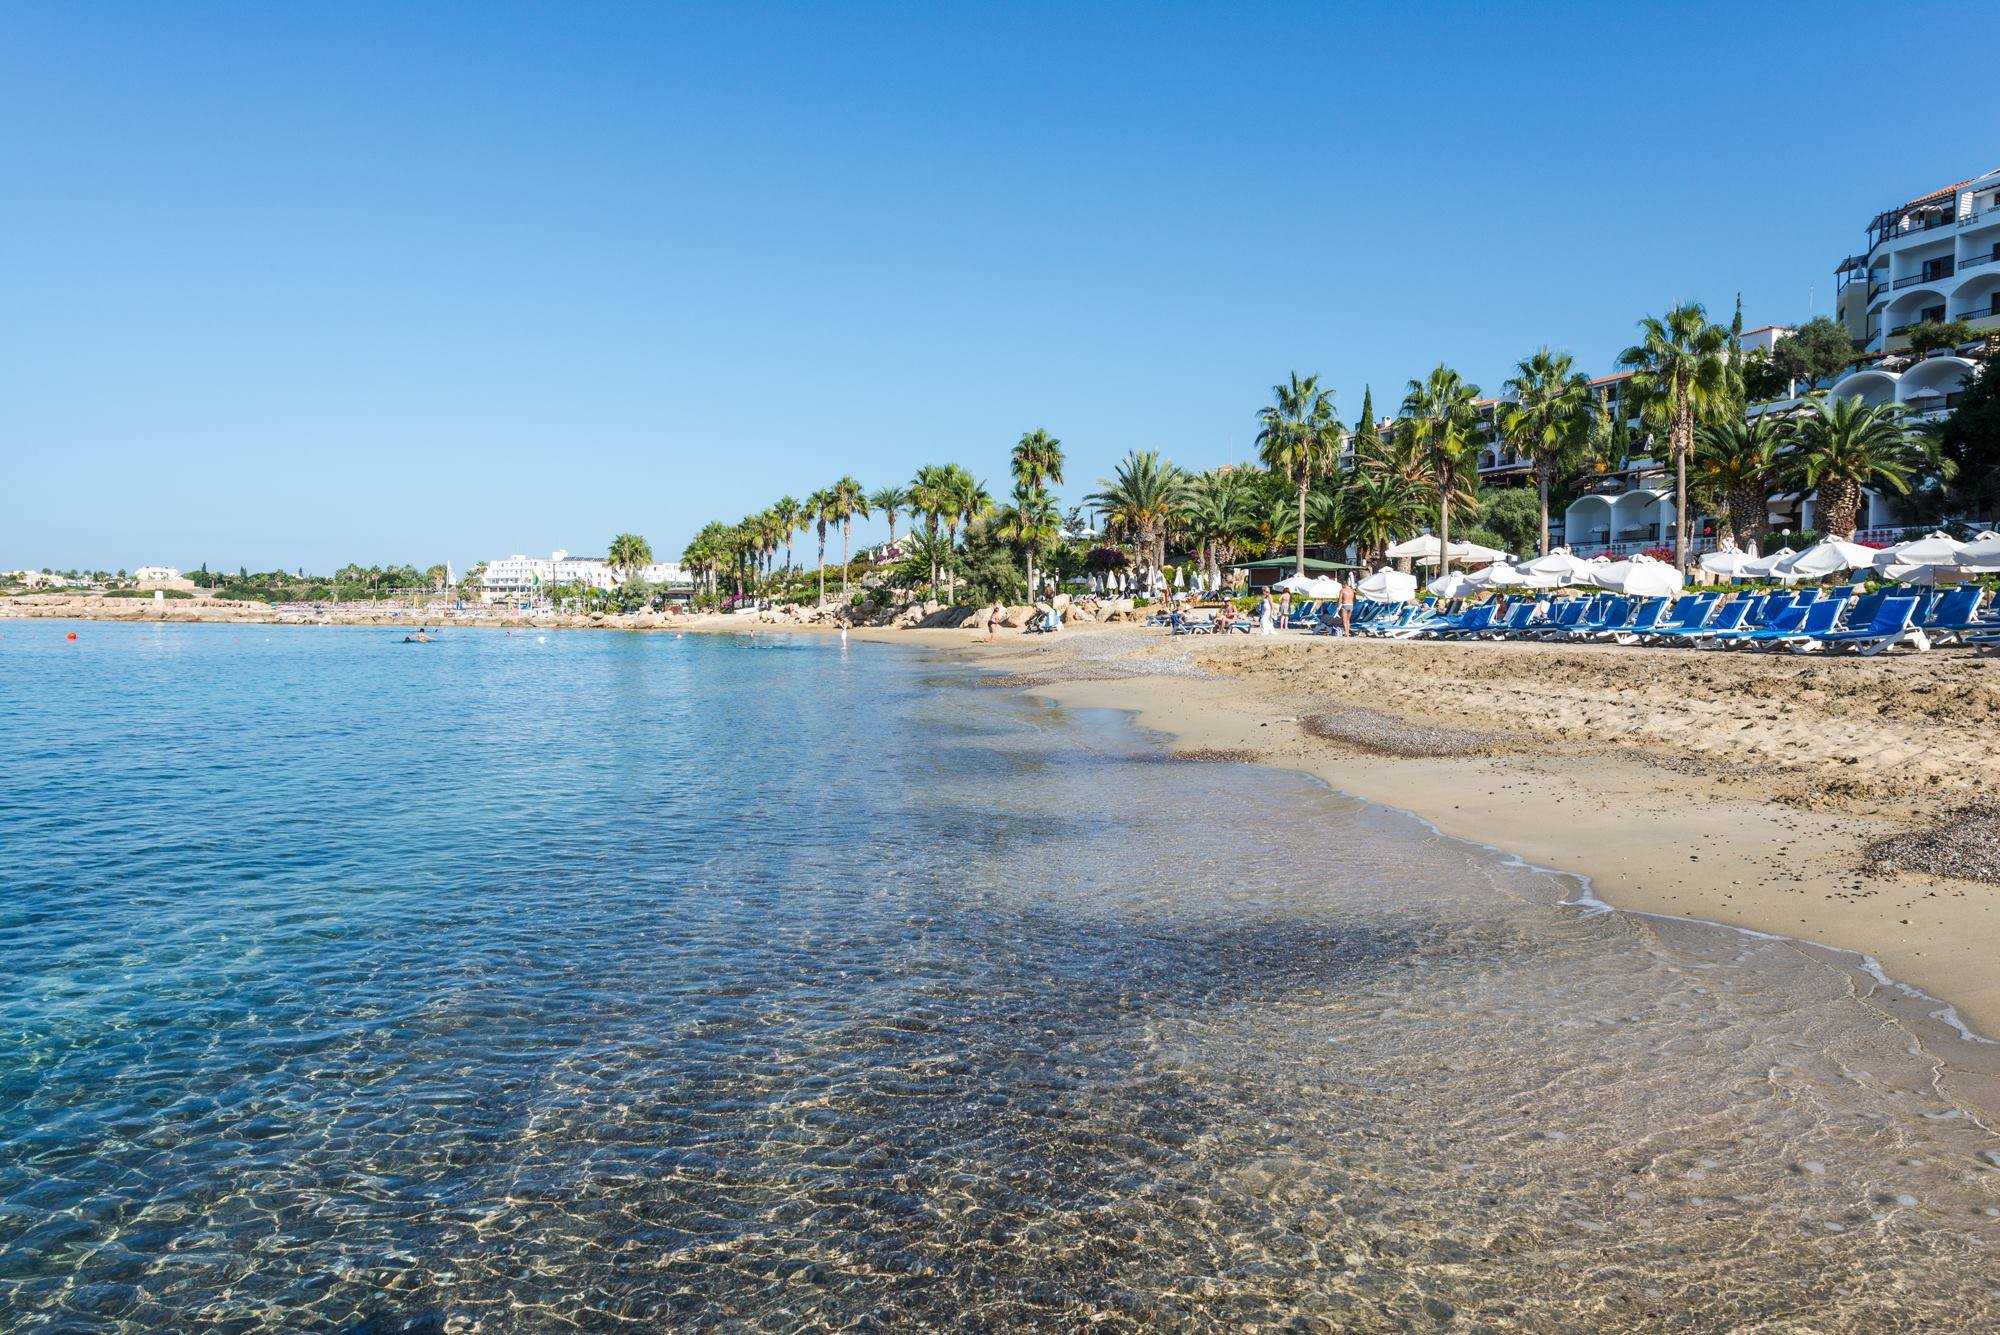 The shallow beach at Coral Beach Hotel & Resort, one of the best all-inclusive resorts in Cyprus for families.